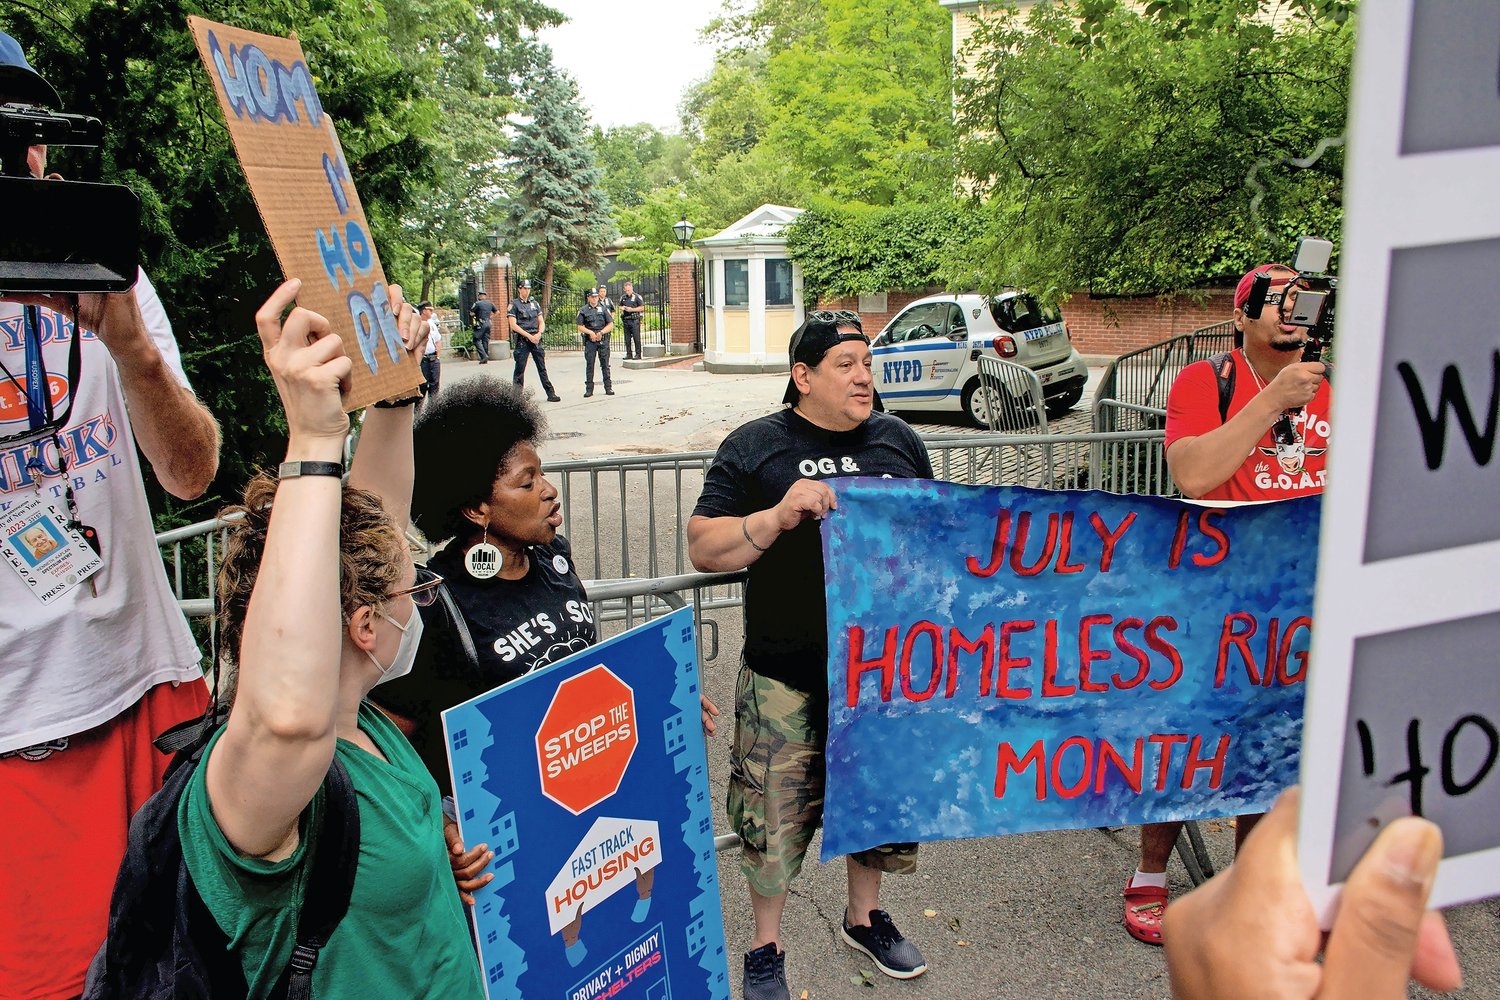 Formerly homeless New Yorkers, now advocates for those facing the same plight, marched to Gracie Mansion with a plea for an end to city street sweeps. “All of our cries on deaf ears!” one demonstrator cried, her shouts echoing through the gates of the empty mansion as NYPD officers stood guard on Sunday, Jul. 17.